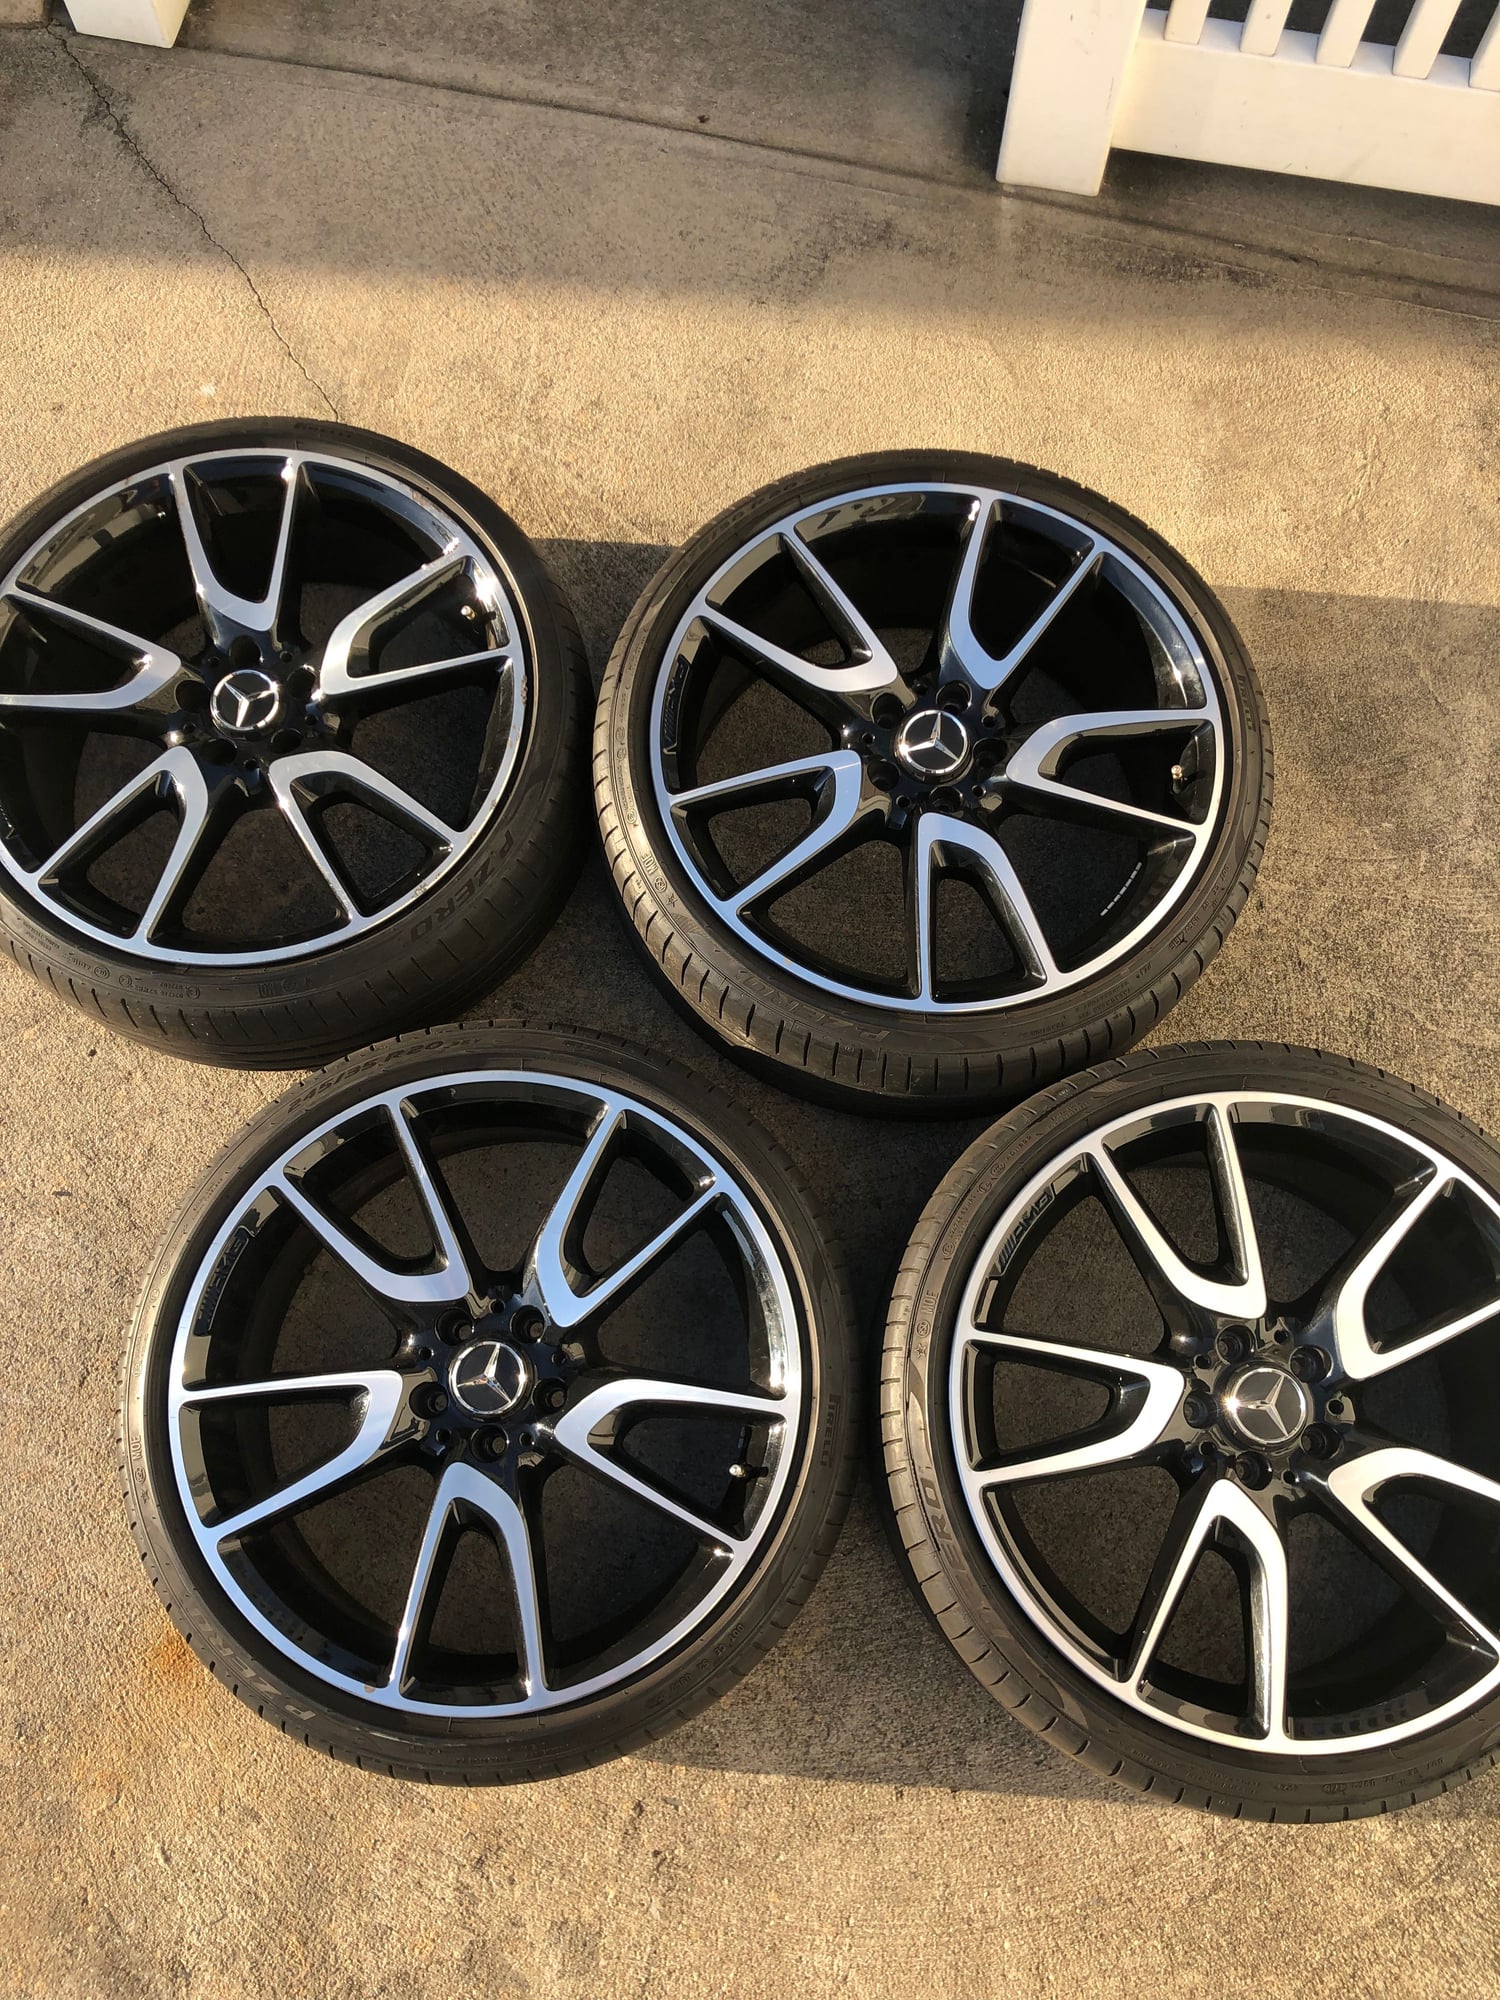 Wheels and Tires/Axles - 2017 e43 oem amg rims - Used - All Years Mercedes-Benz E43 AMG - Lynbrook, NY 11563, United States